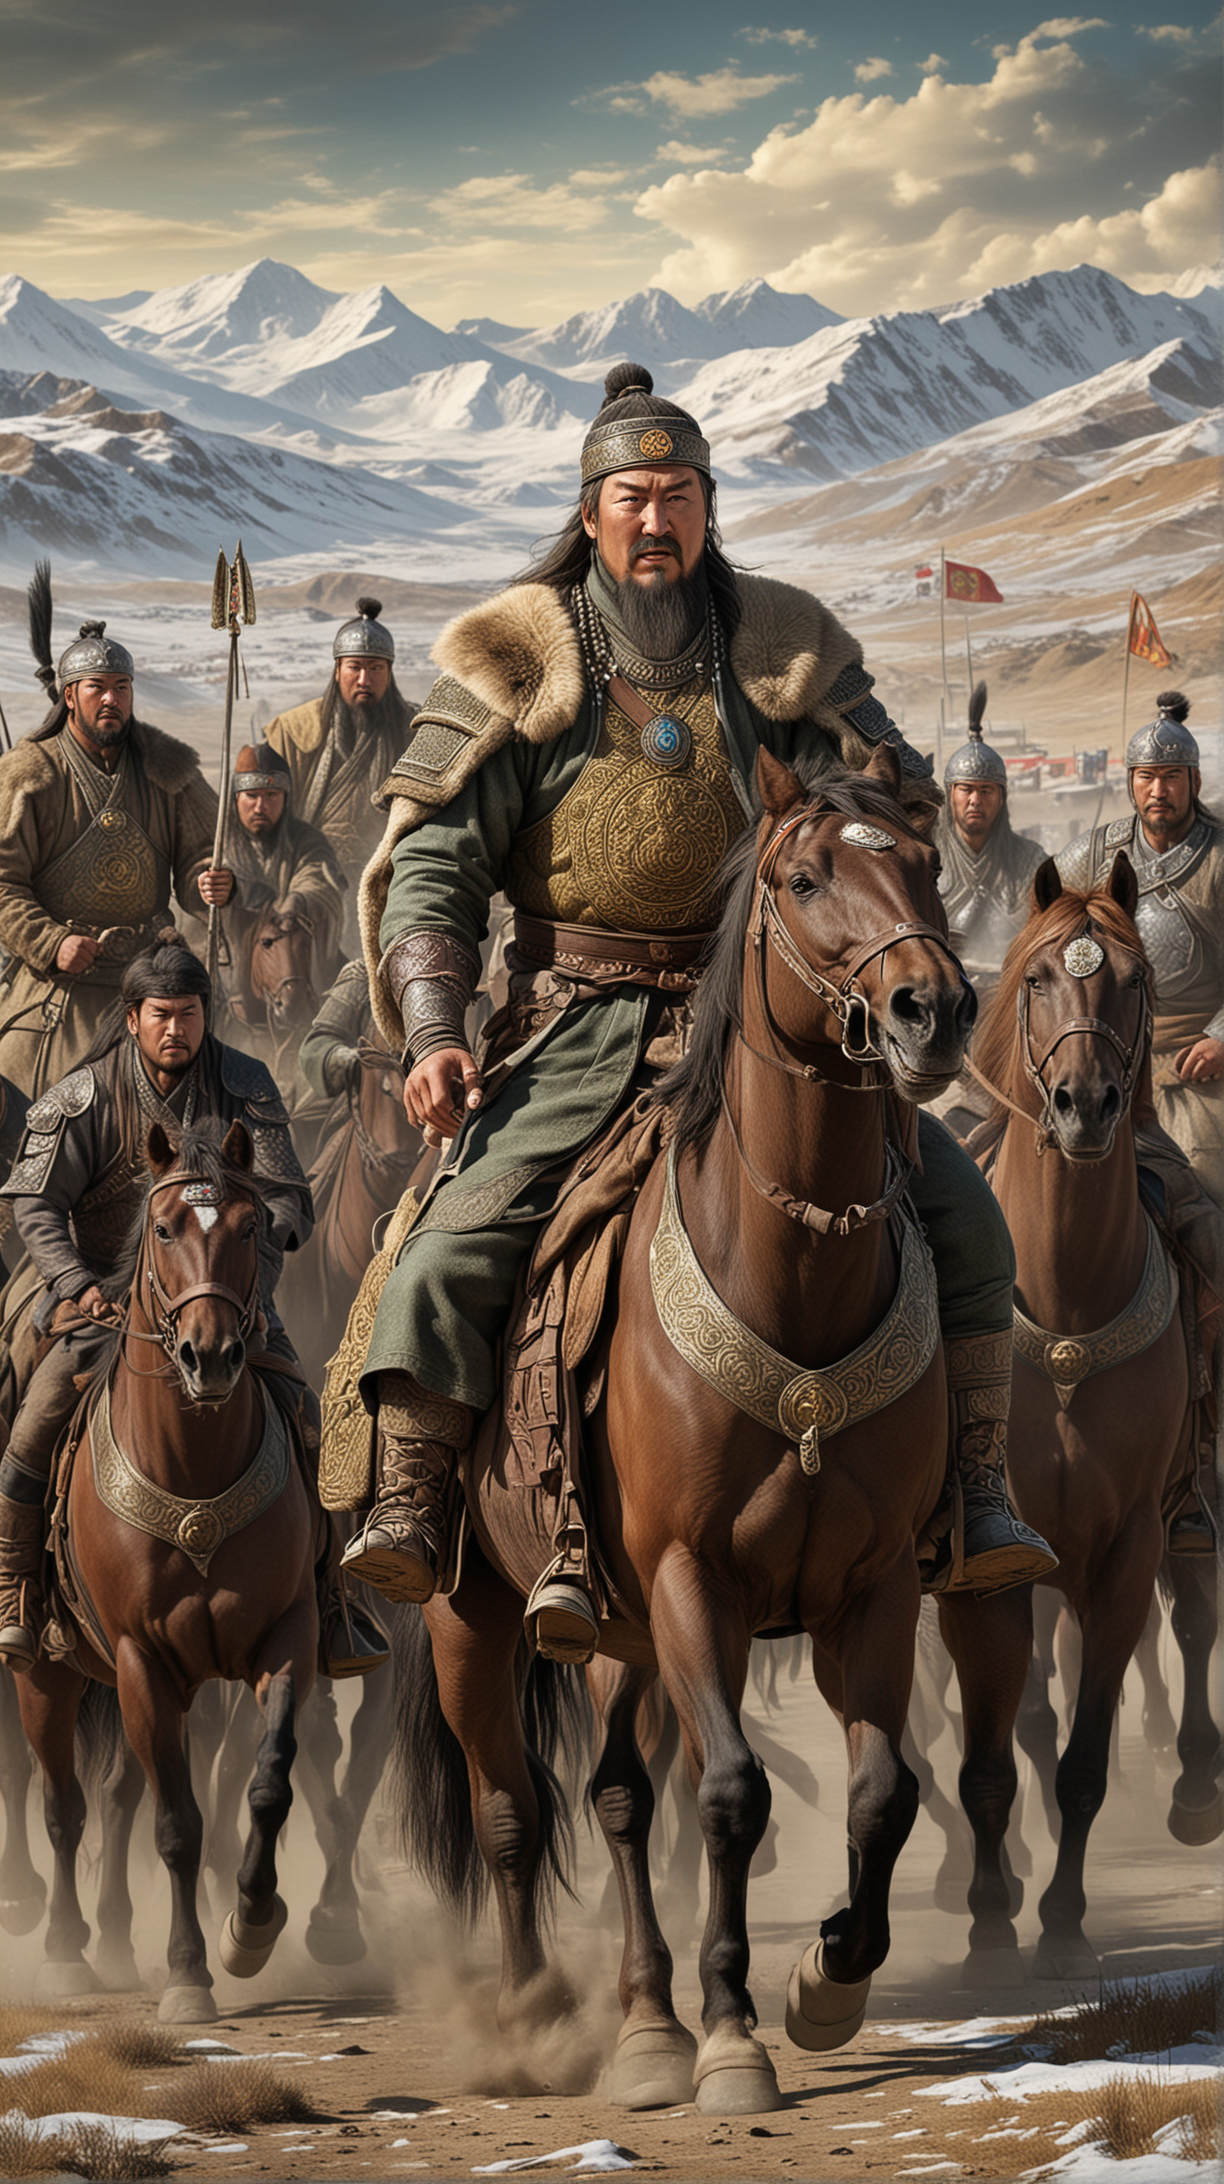 Legacy and Successors: Create an image representing Genghis Khan's legacy, with his descendants continuing his conquests and ruling over the vast Mongol Empire. Hyper realistic